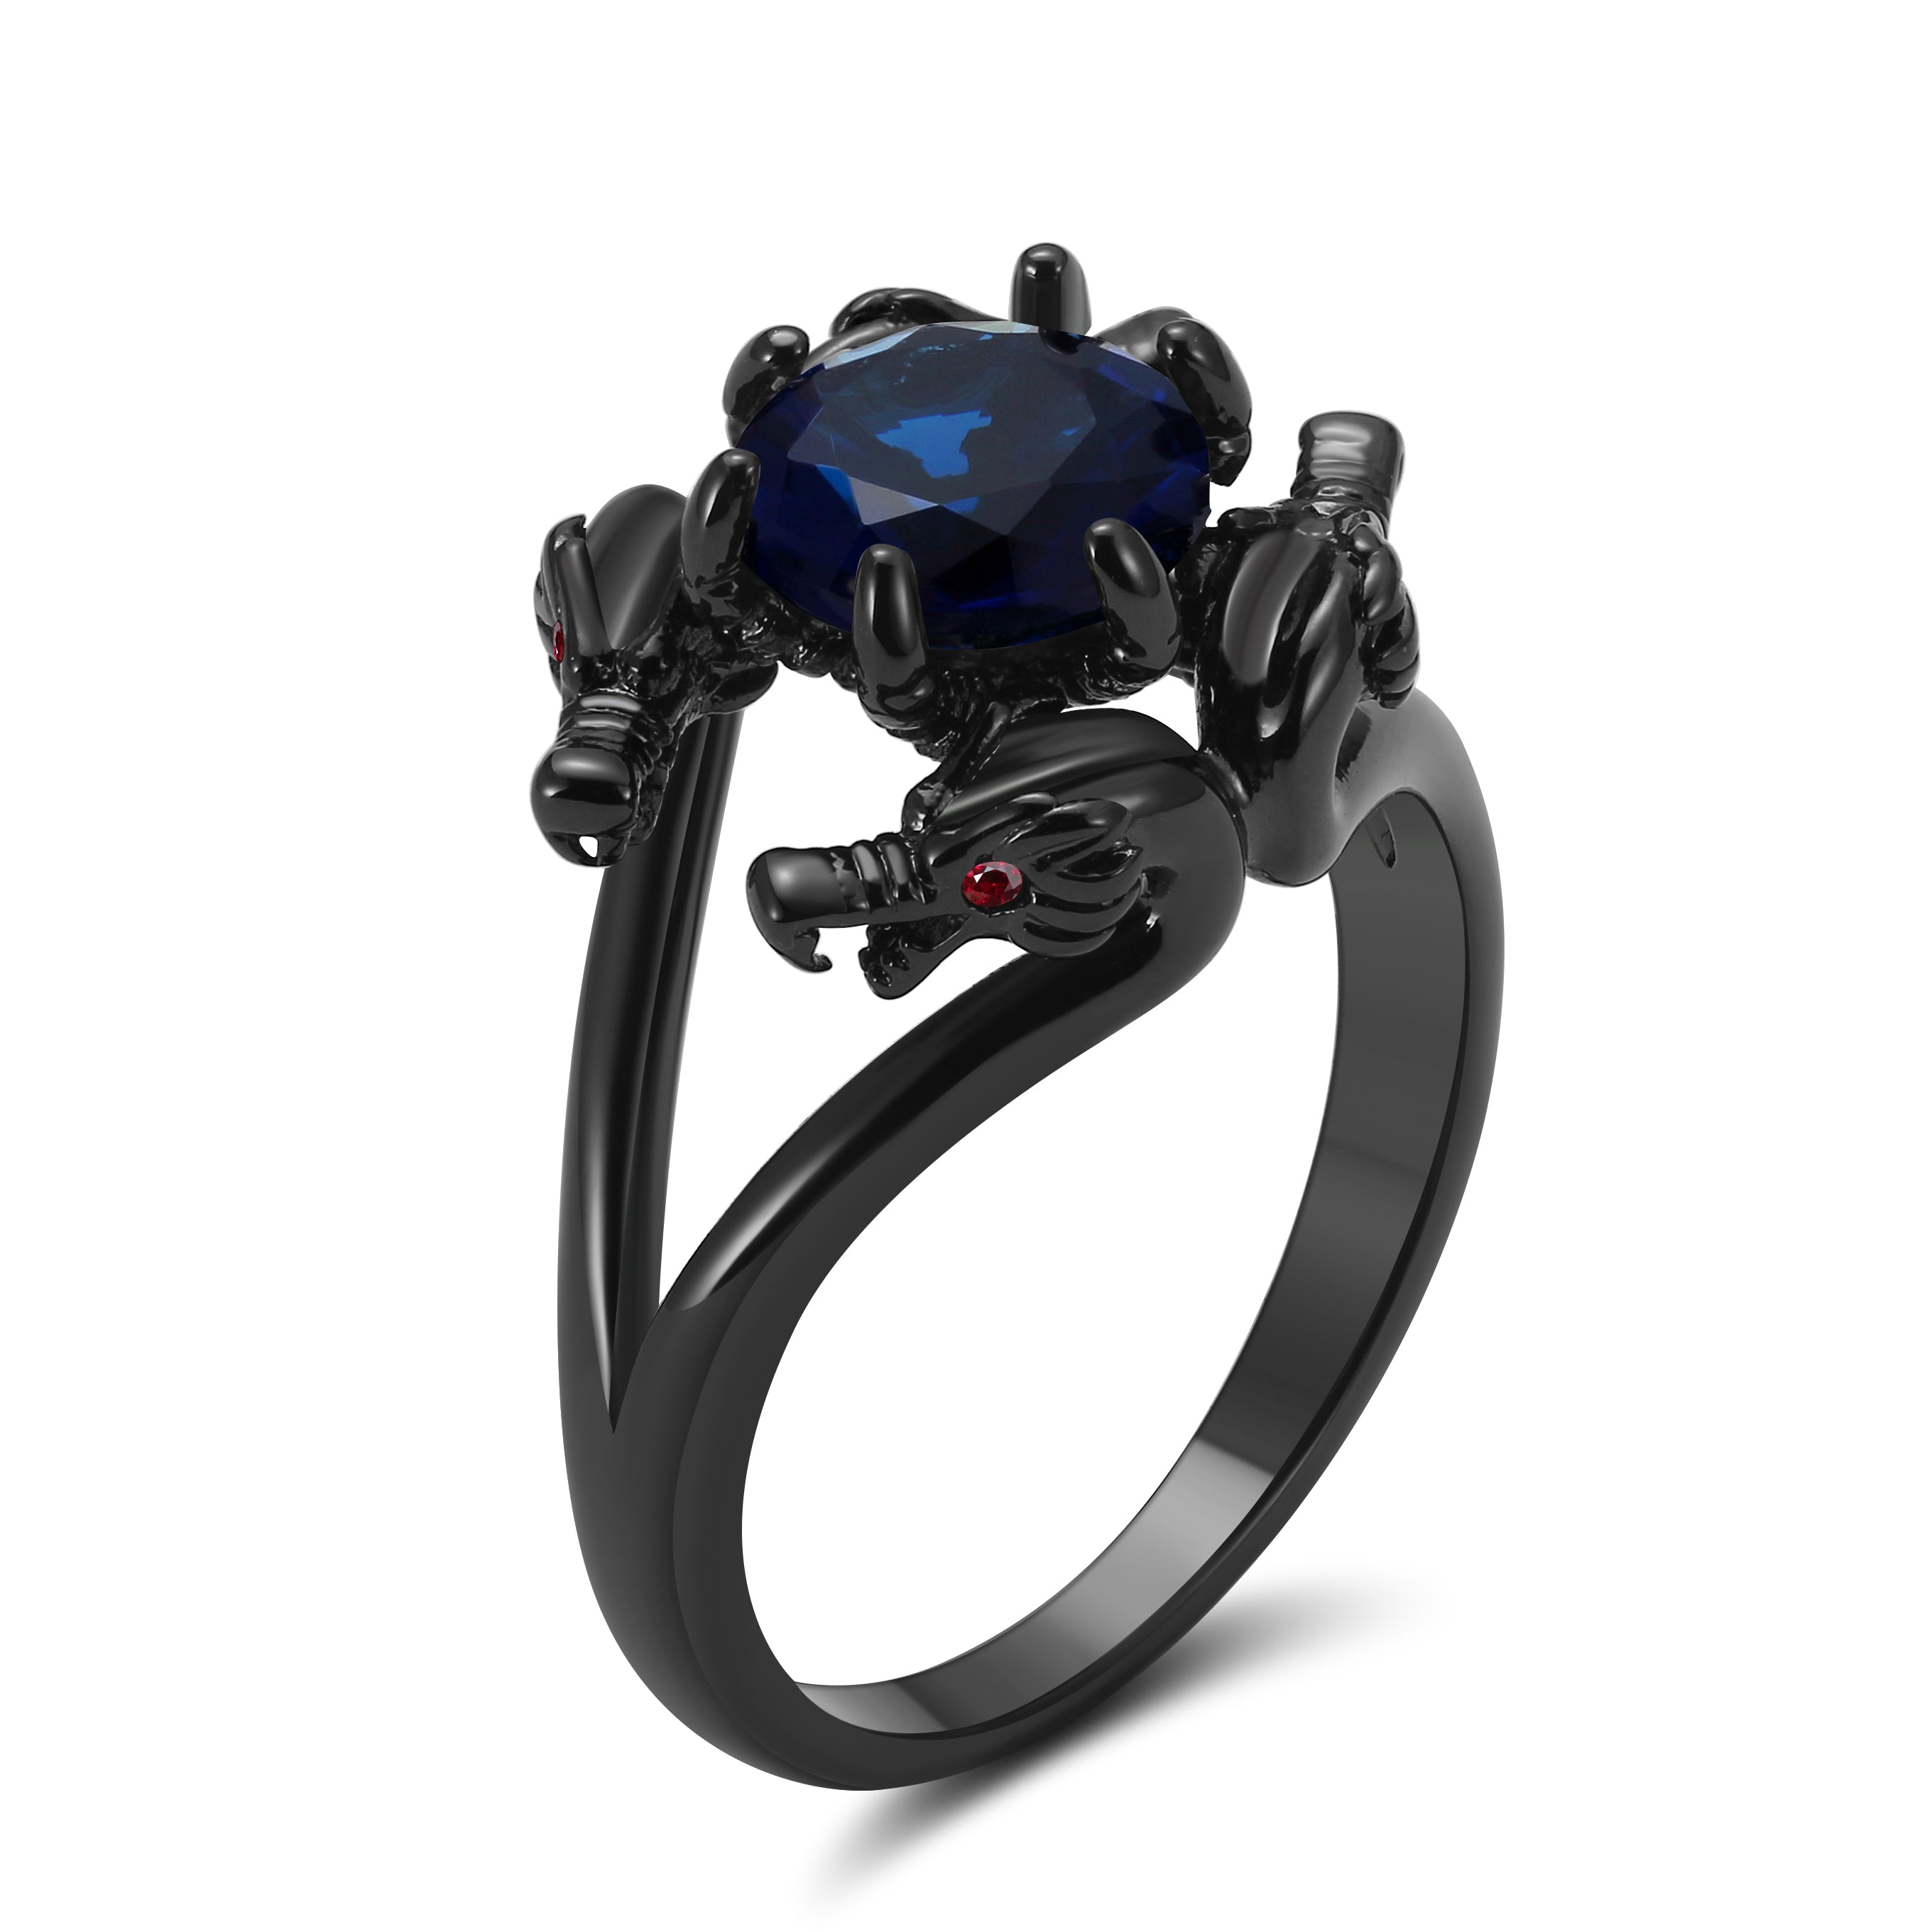 Dragon Ring Gothic Solitaire Cz Black Engagement Ring Girl Ginger Lyne Collection - Blue,9